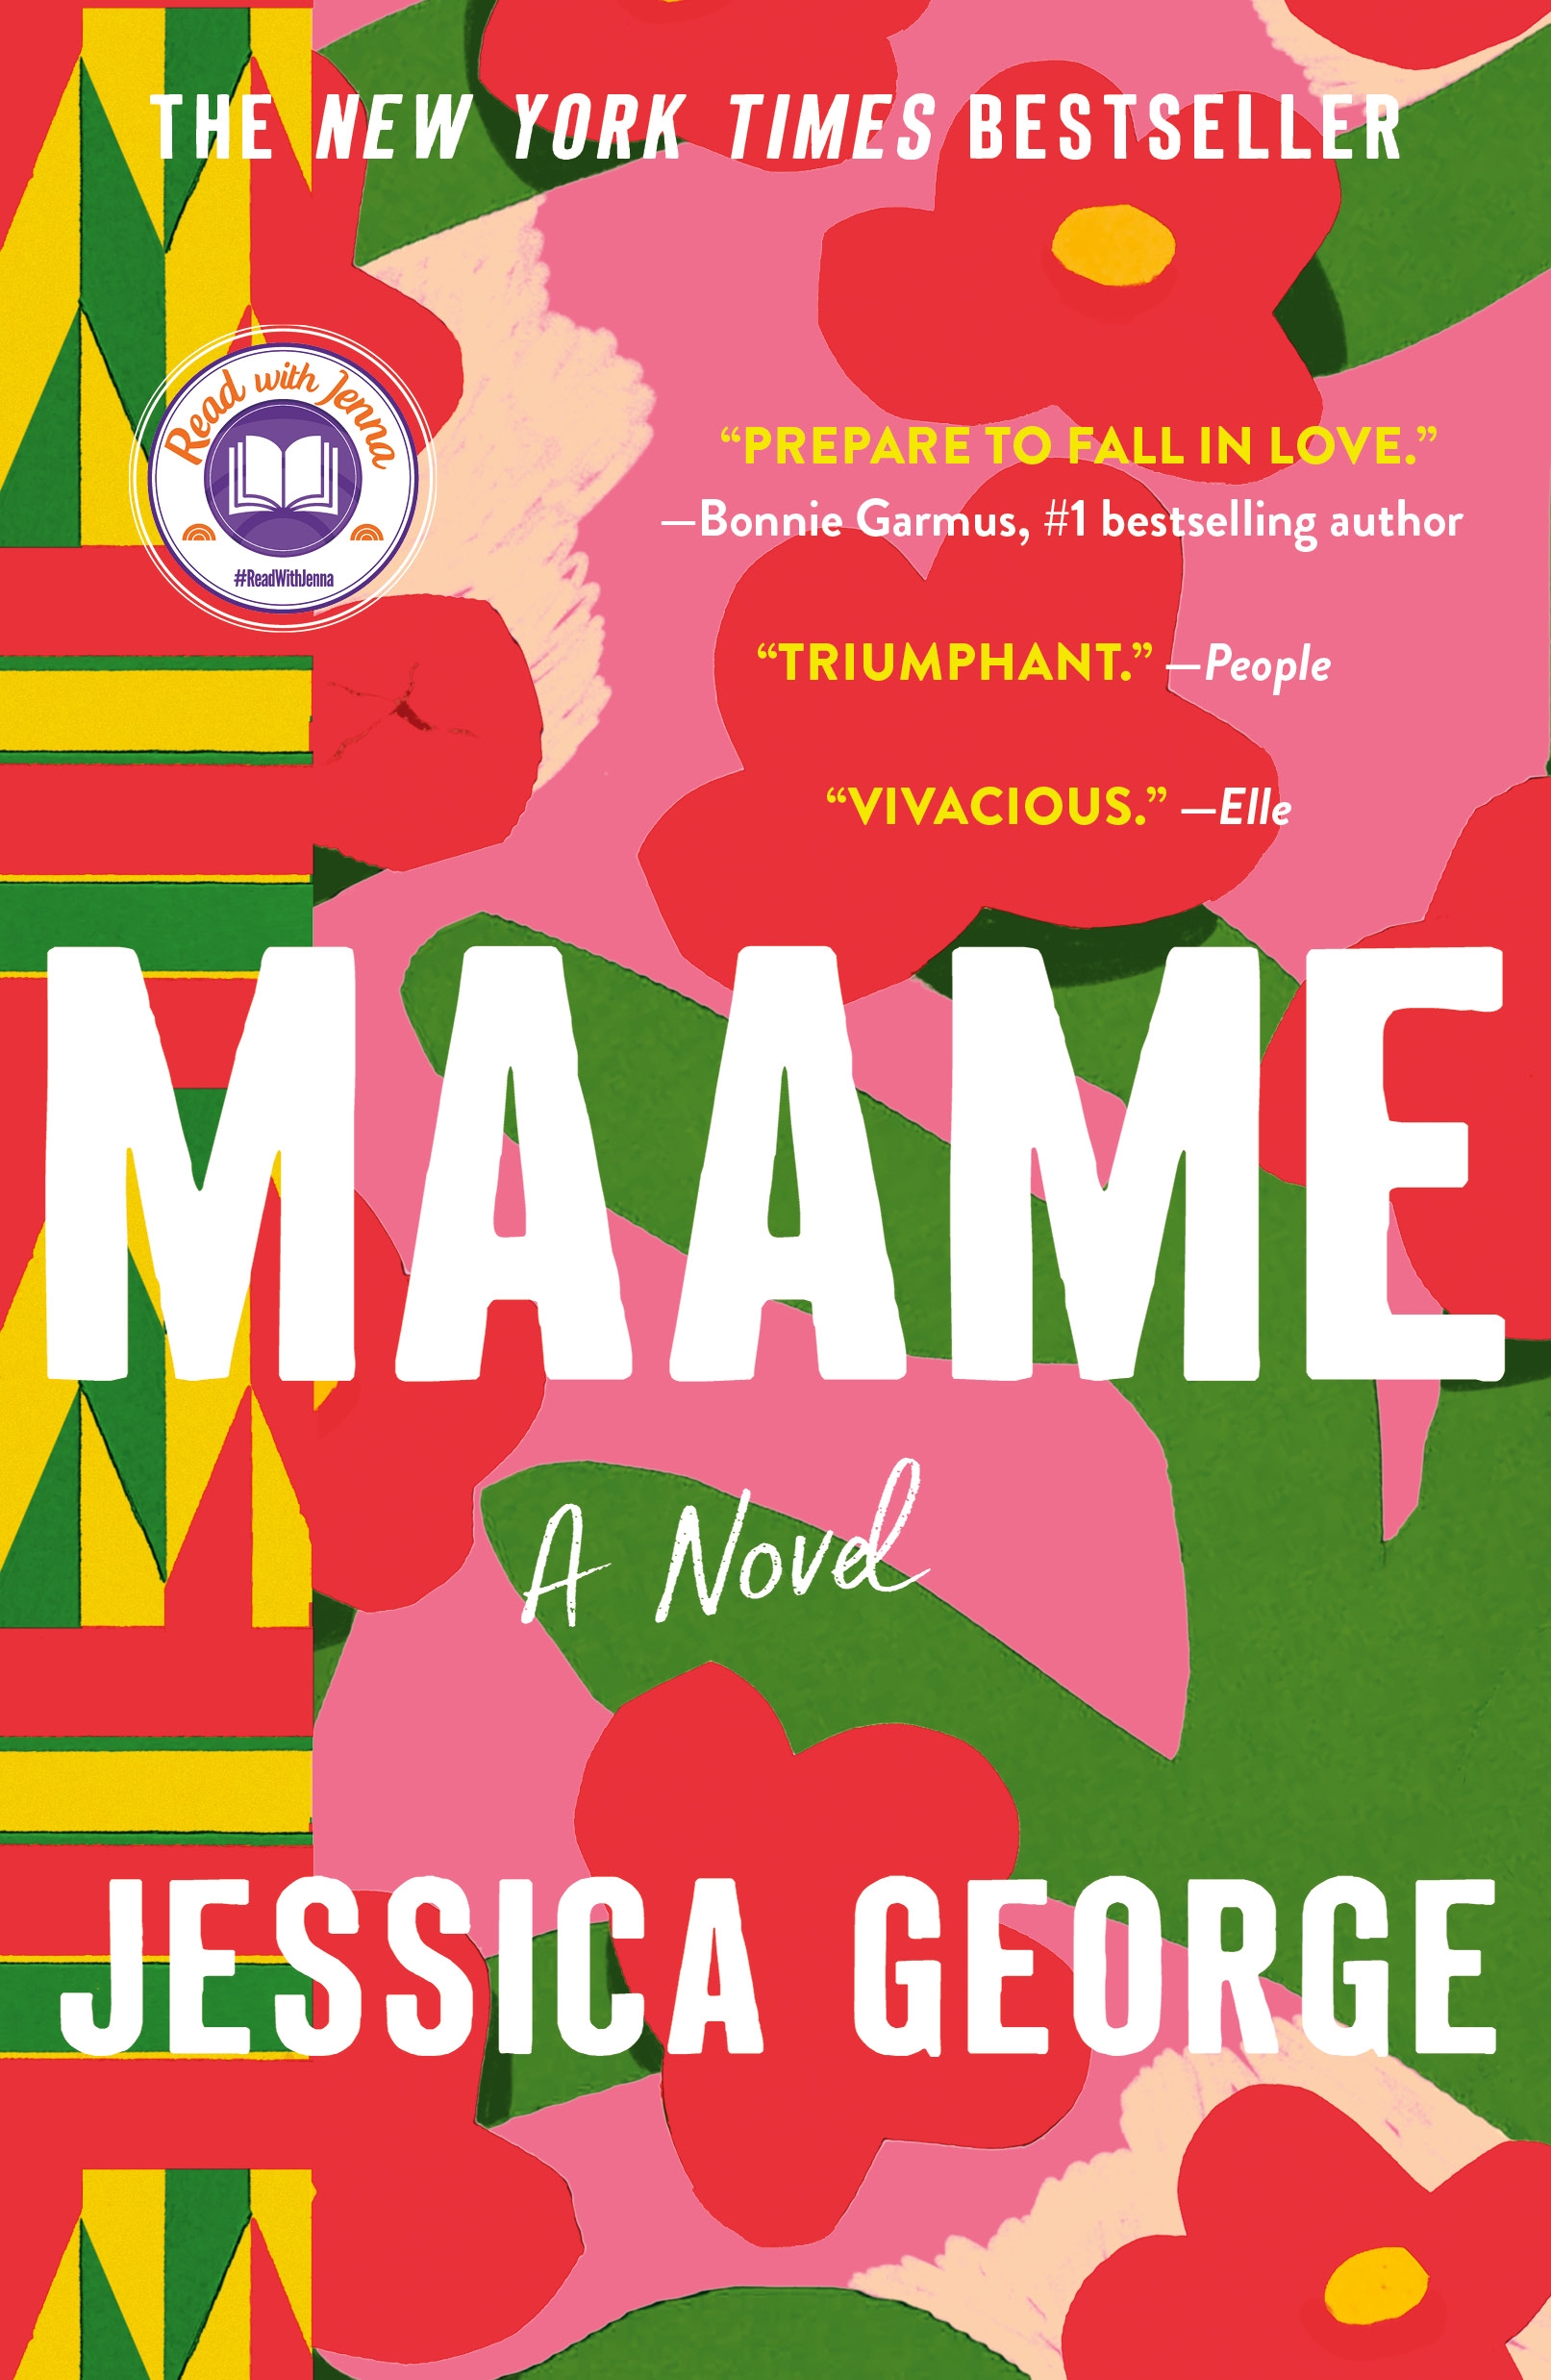 Maame cover image